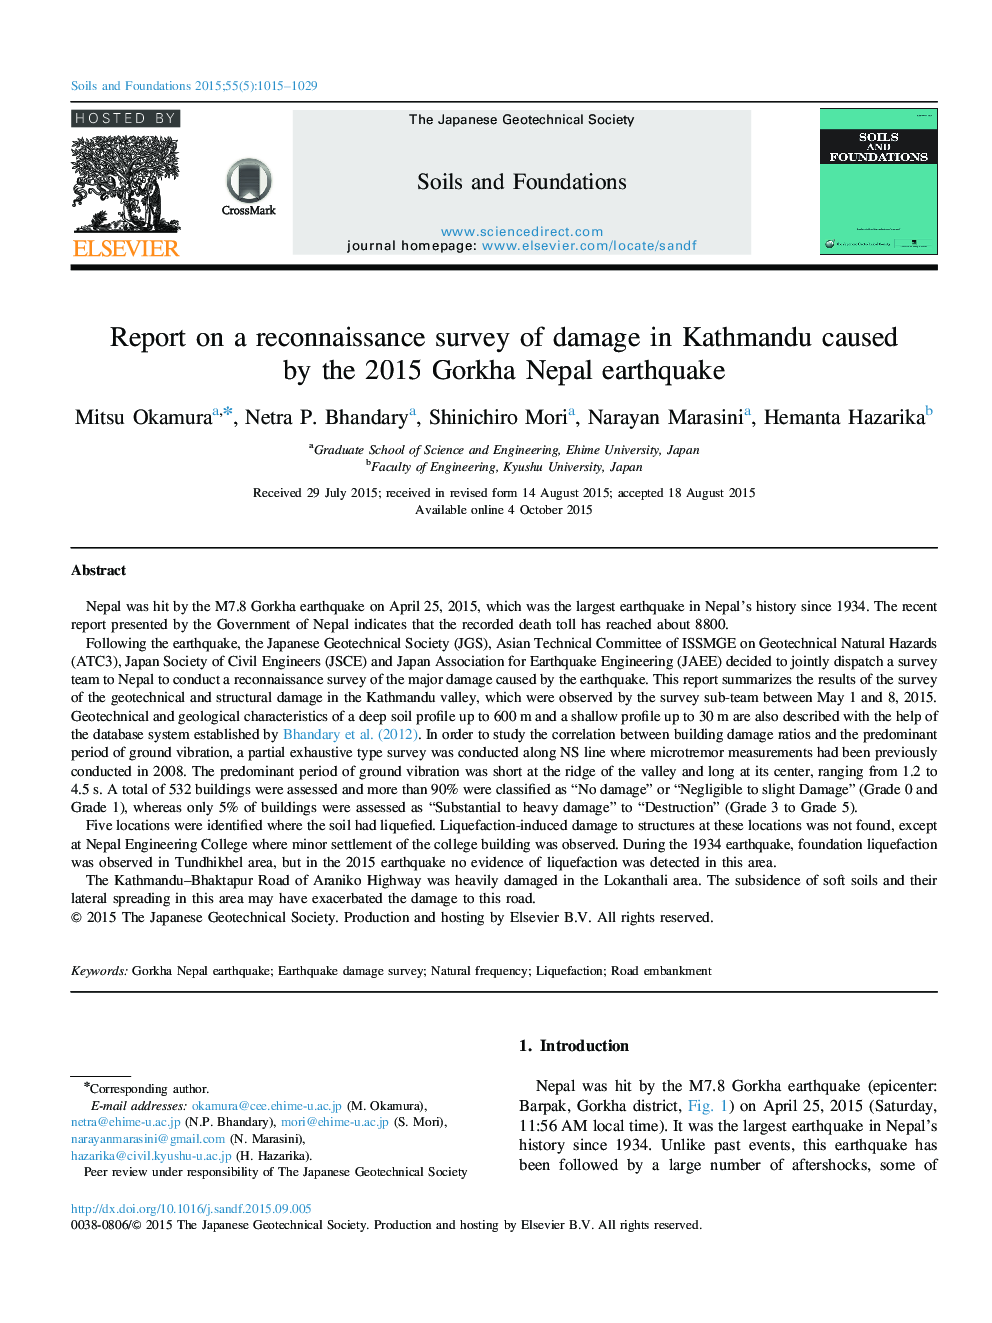 Report on a reconnaissance survey of damage in Kathmandu caused by the 2015 Gorkha Nepal earthquake 